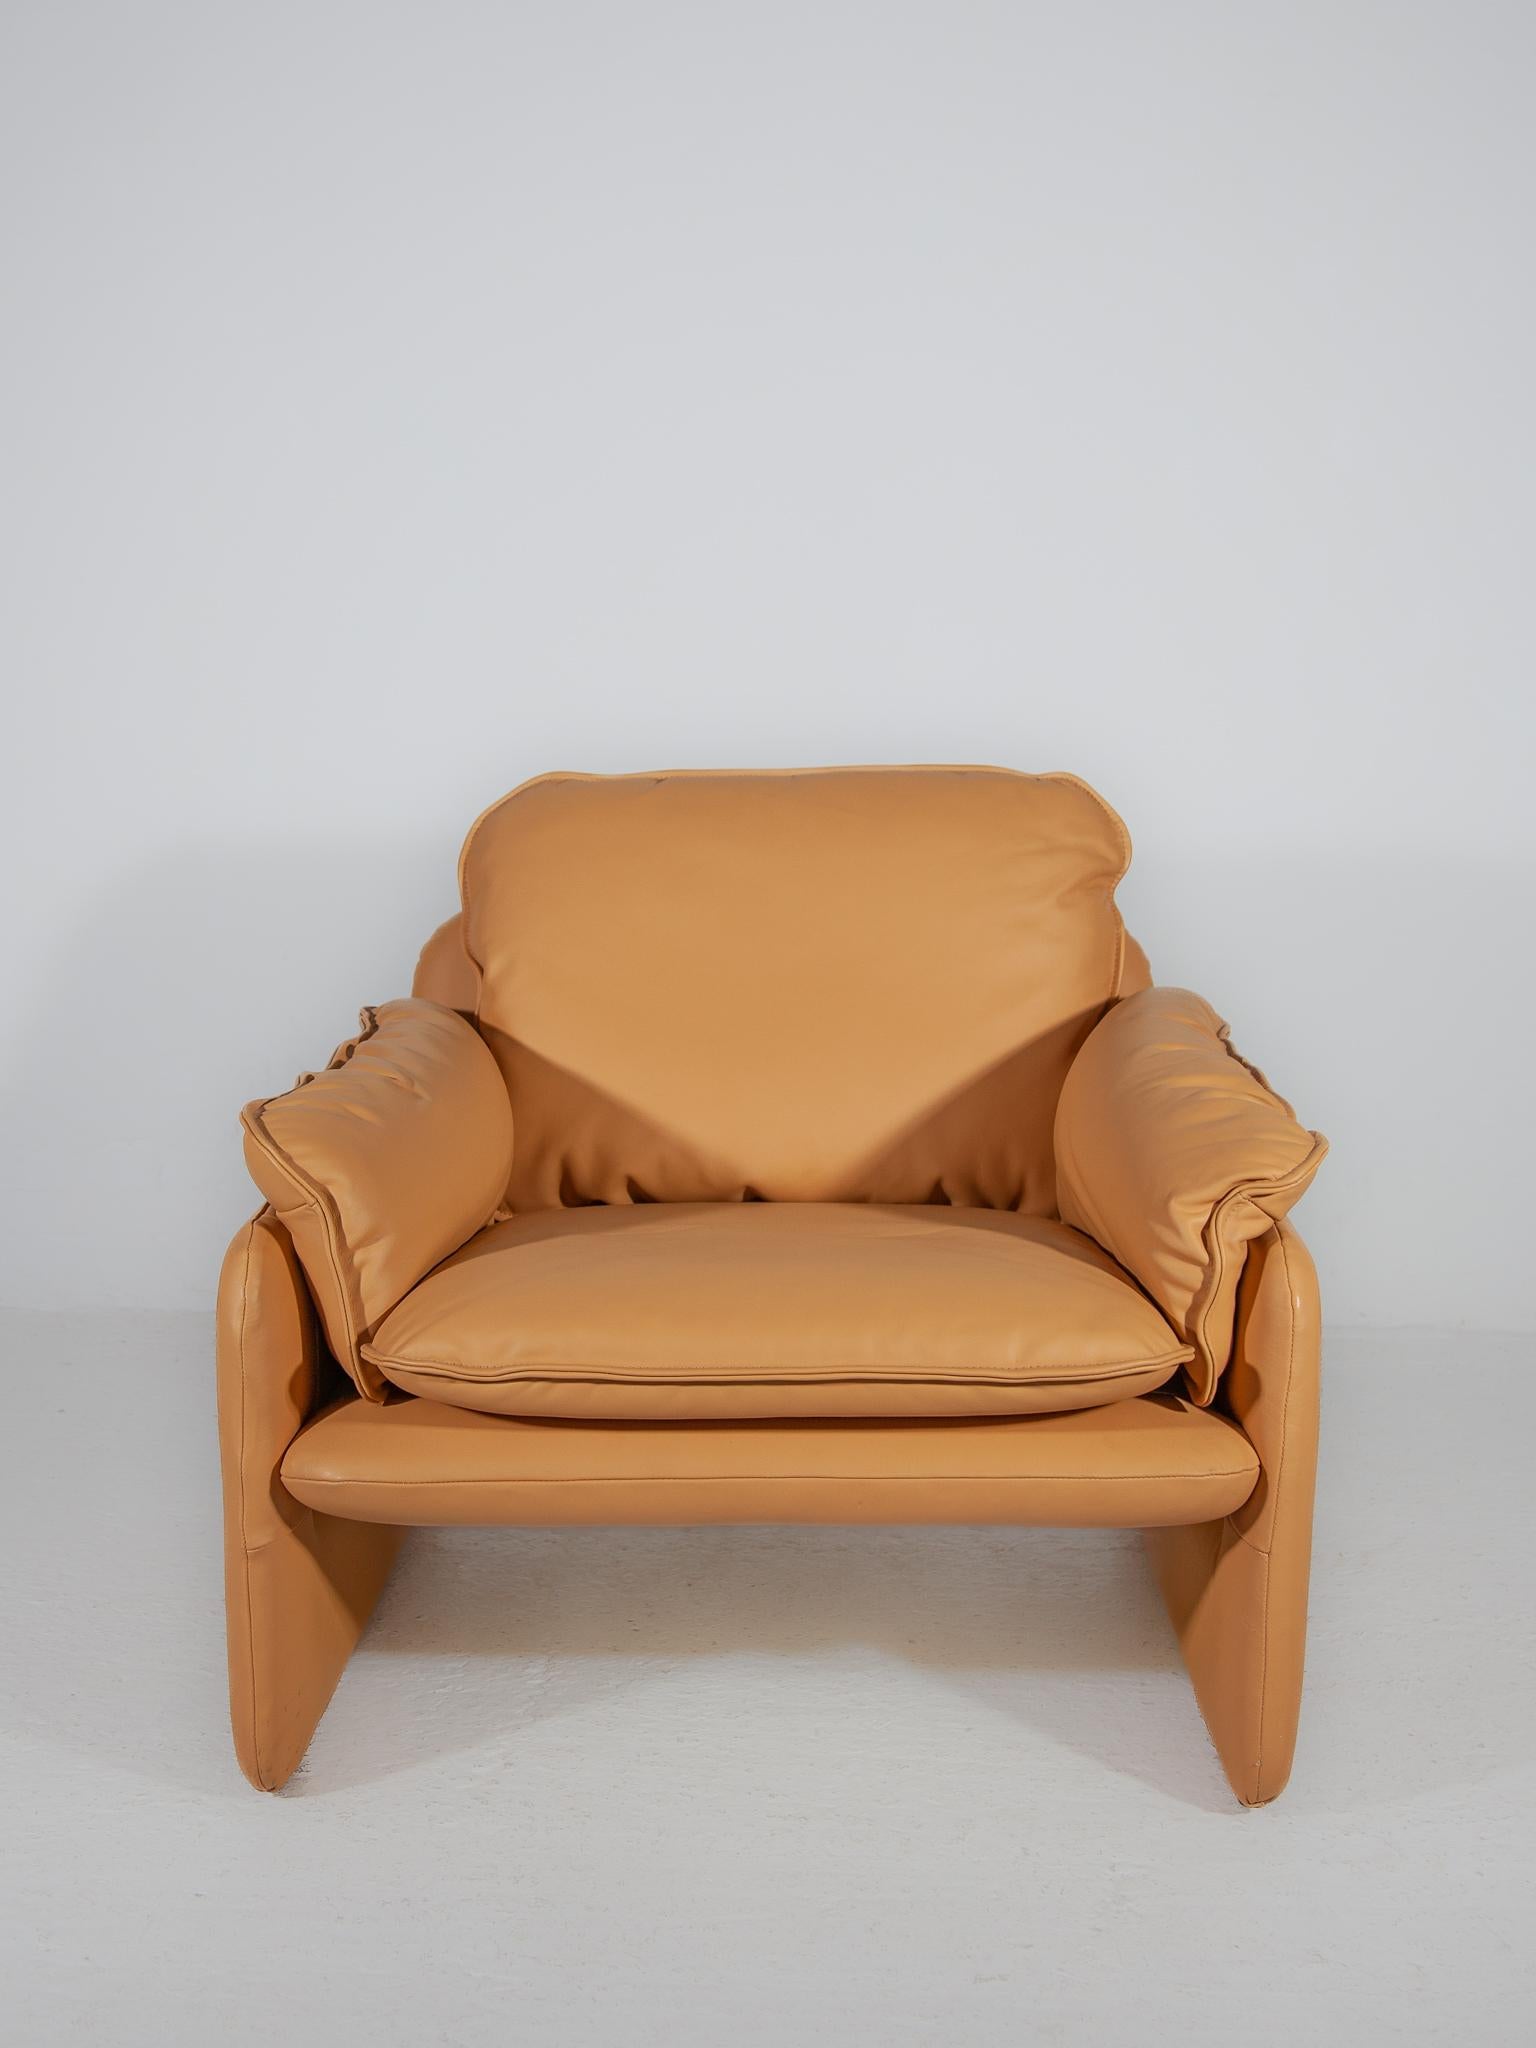 Hand-Crafted Set of 2 Ds-61 Armchairs Camel Leather designed by De Sede, 1970s For Sale